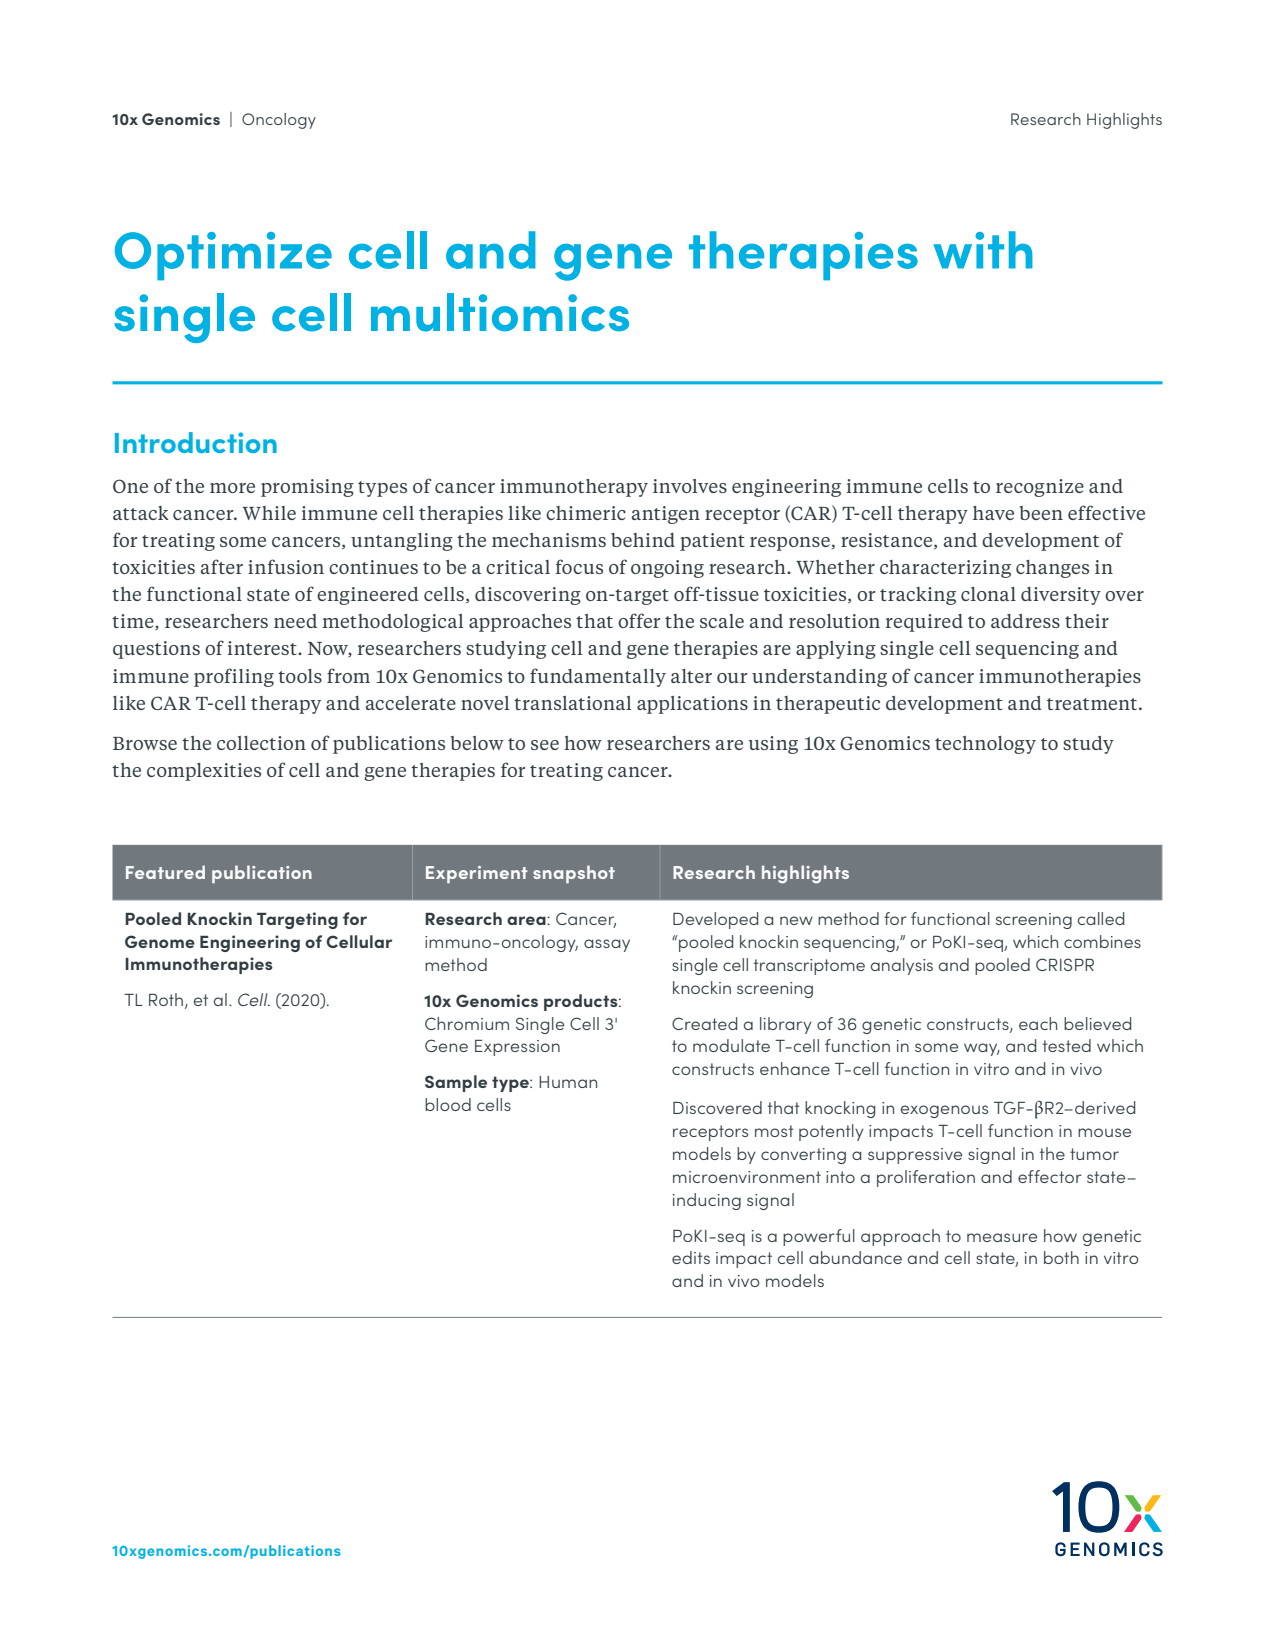 Optimize cell and gene therapies with single cell multiomics